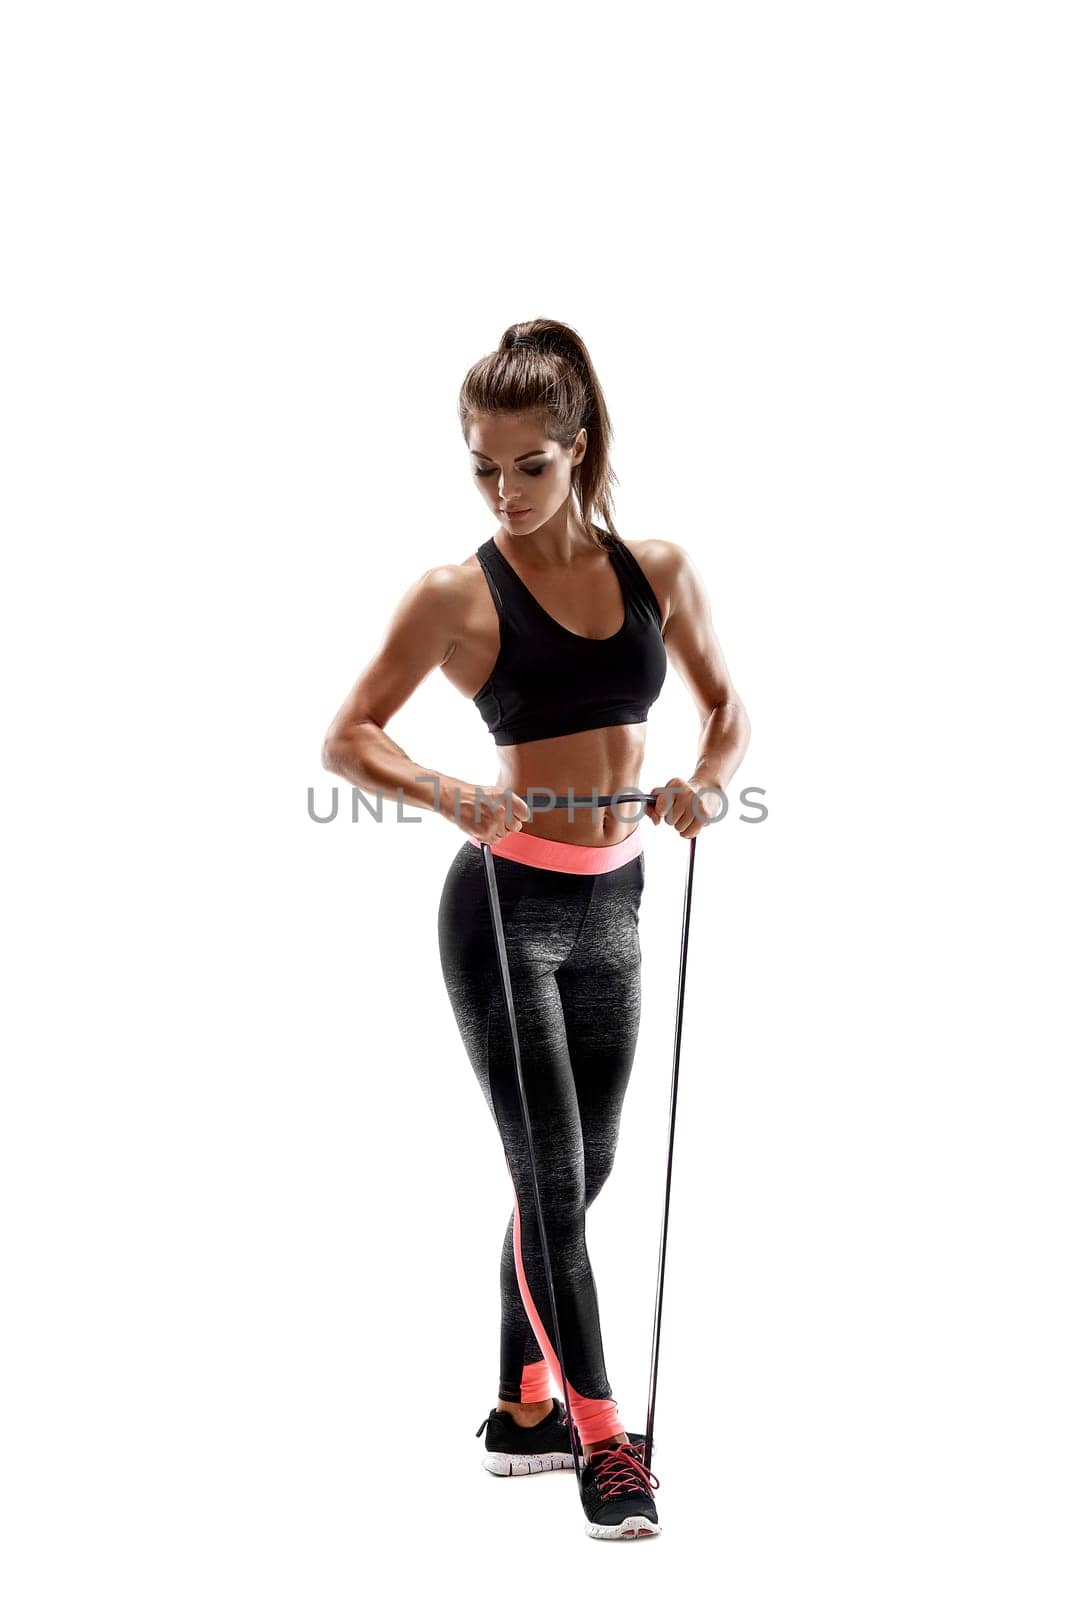 One caucasian woman exercising fitness resistance bands in studio silhouette isolated on white background